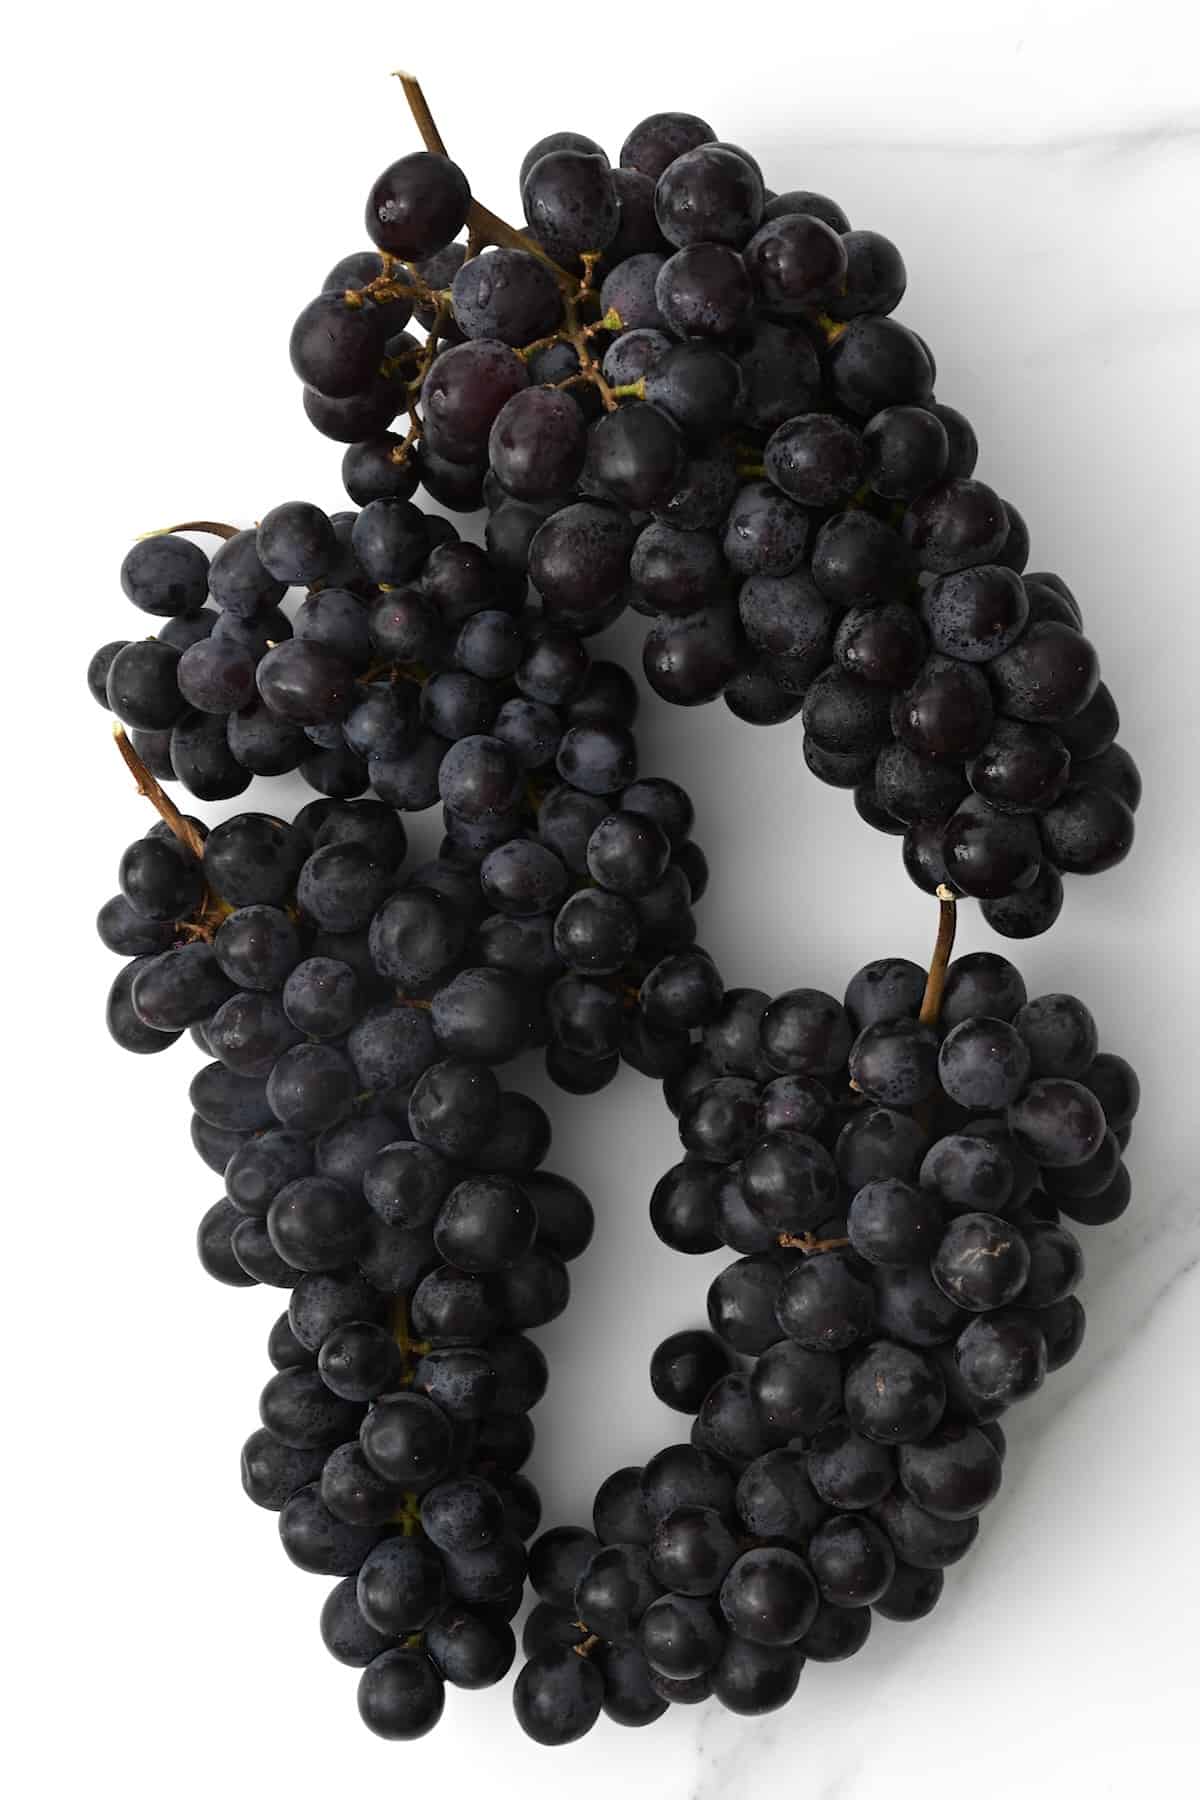 Black grapes on a flat surface